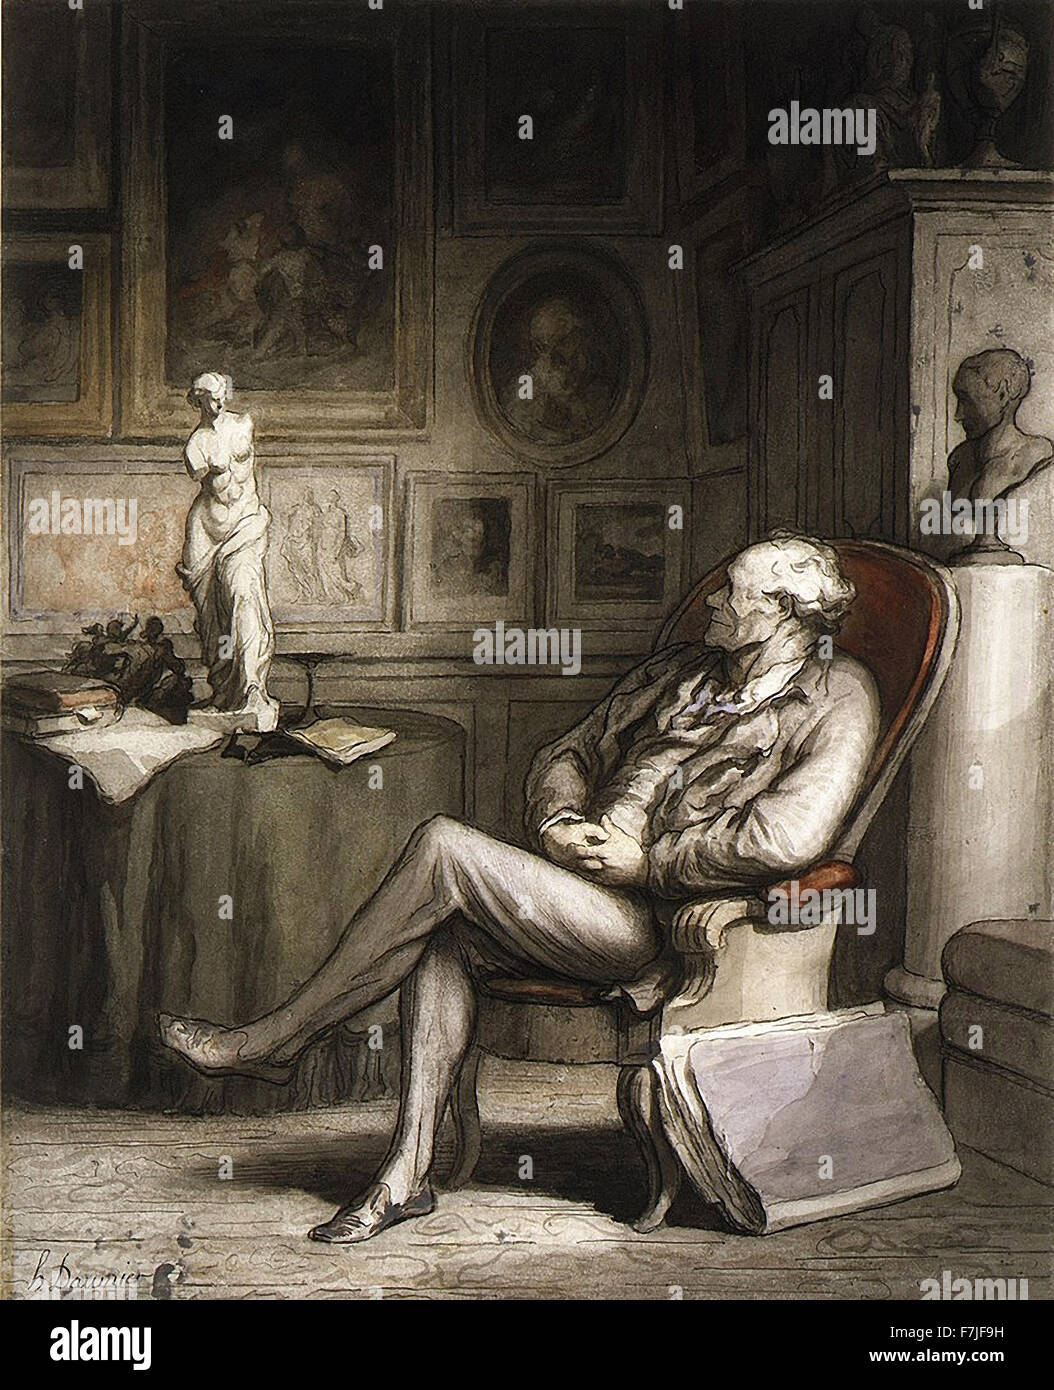 Honoré-Victorin Daumier - Kenner Stockfoto